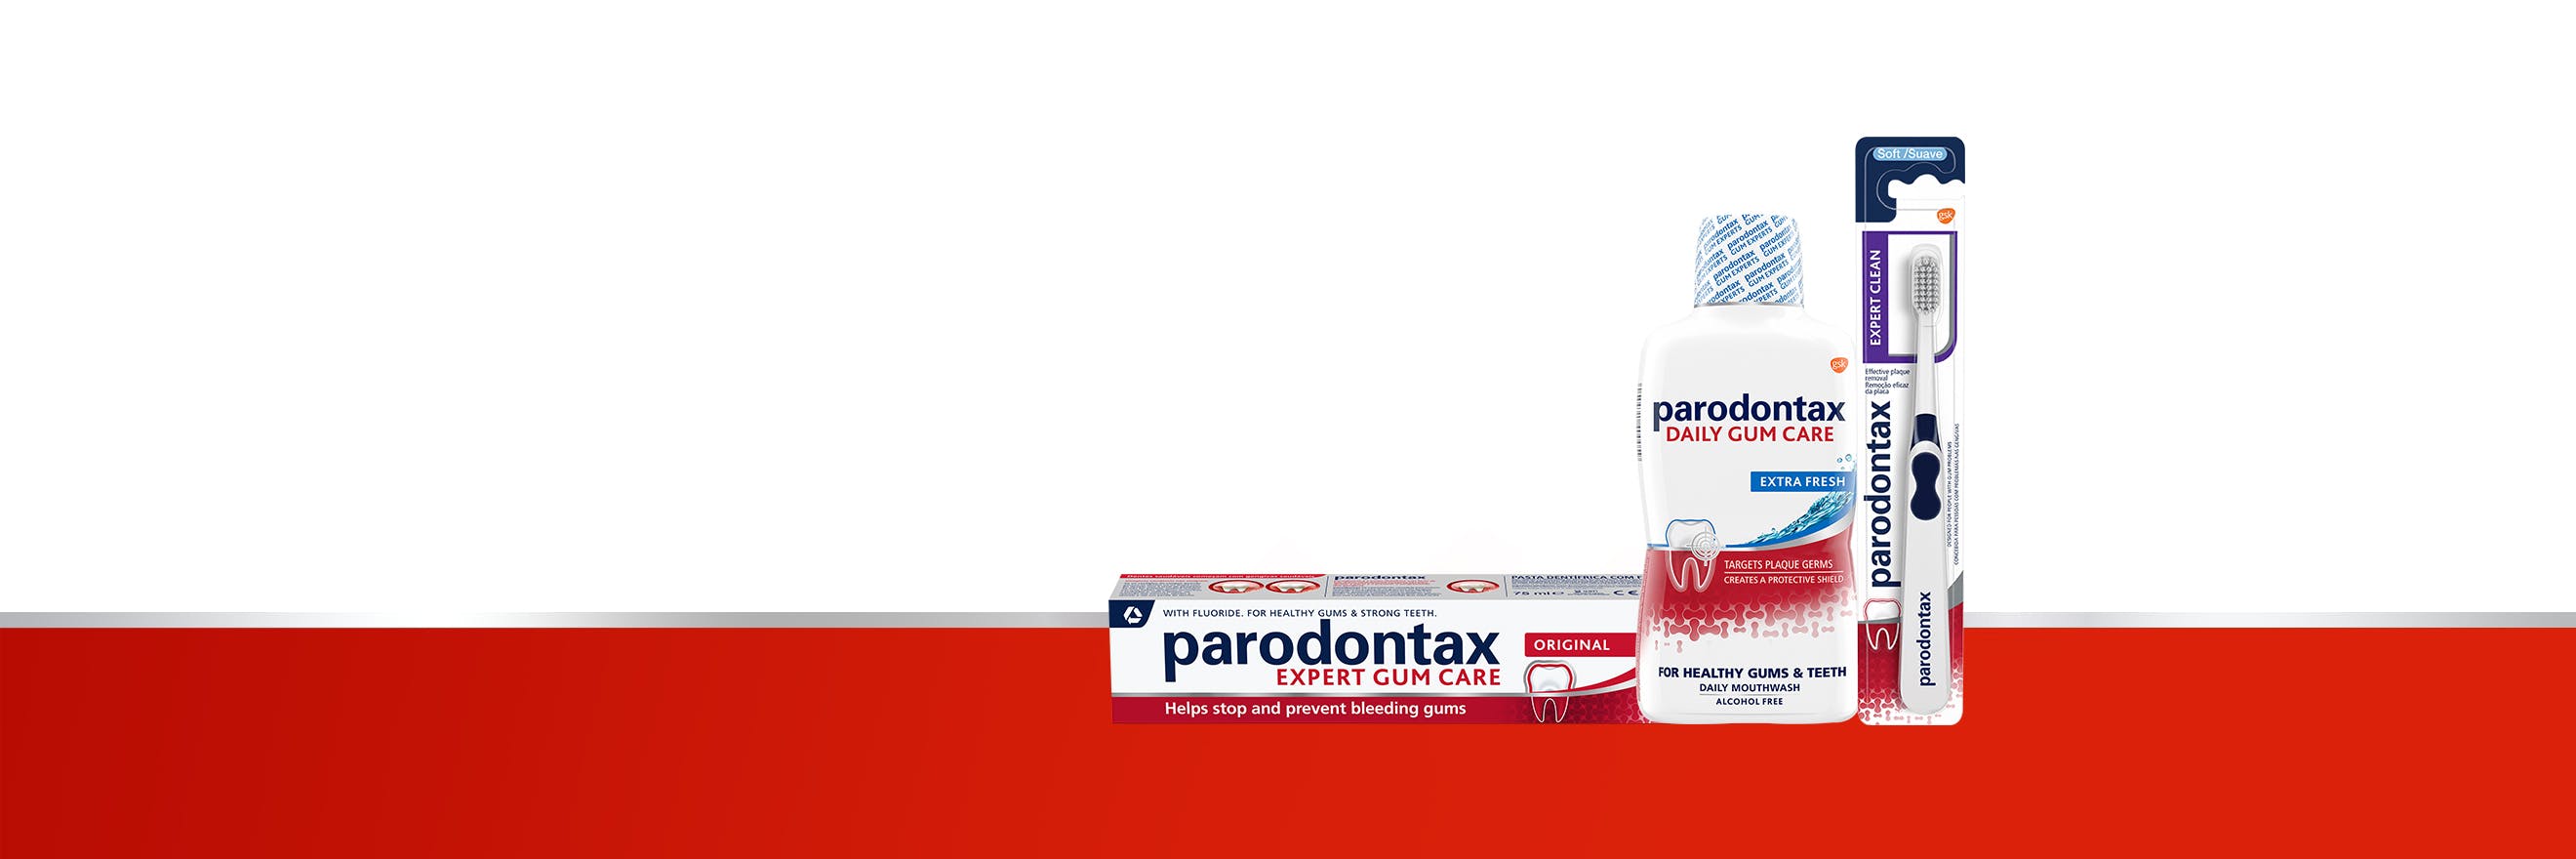 parodontax toothpaste, toothbrush and mouthwash.